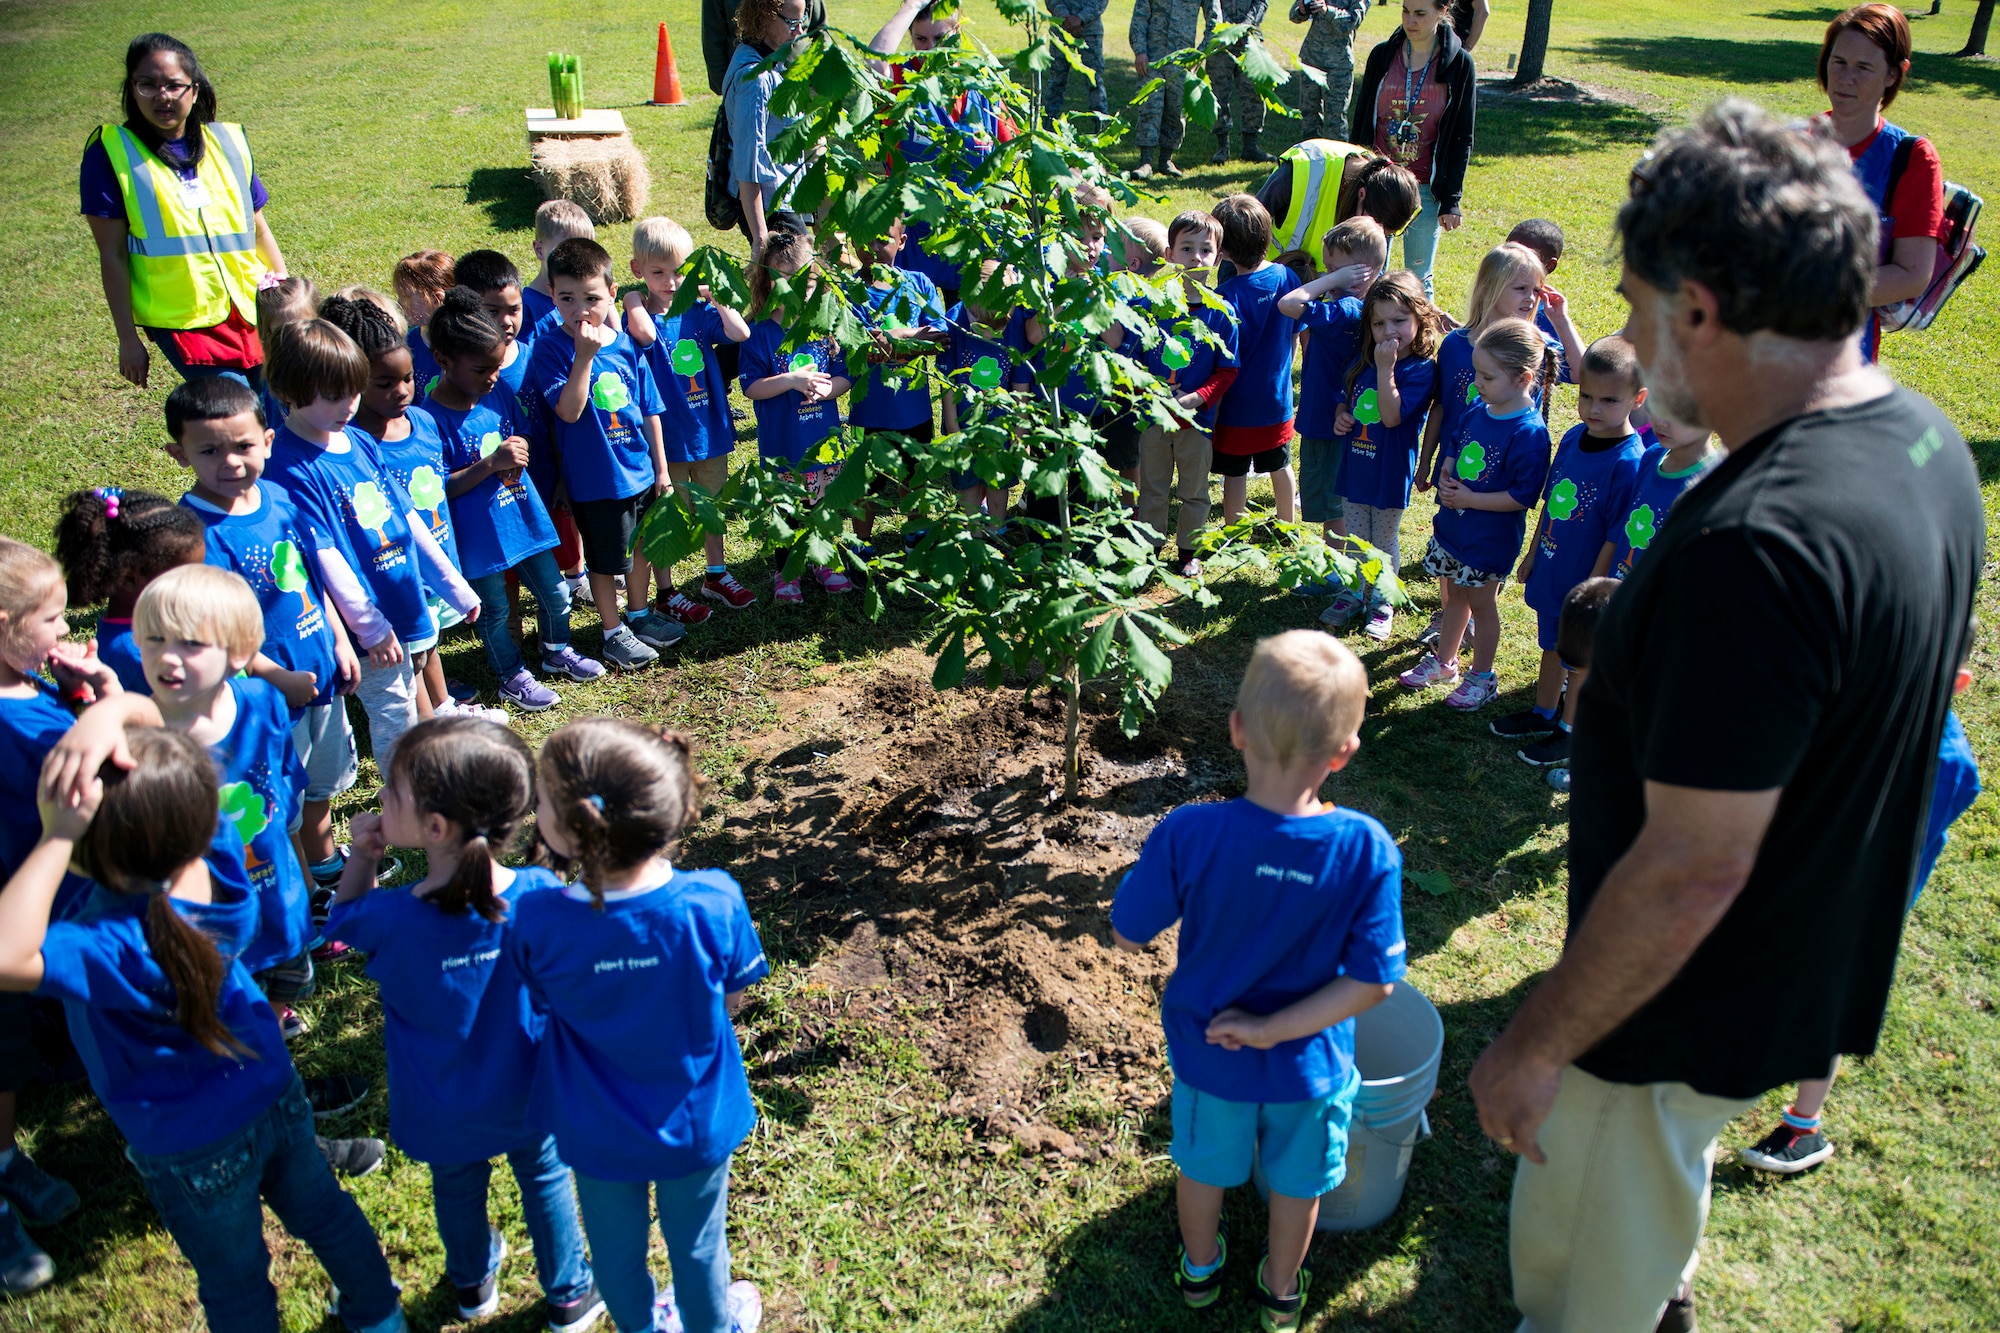 Children from Moody’s child development center circle around a newly planted oak tree during Arbor Day, April 27, 2018, at Moody Air Force Base, Ga. Moody annually celebrates the holiday which encourages the benefits of planting trees. For 19 years the base has been a part of the Tree City USA Program by the National Arbor Day Foundation, to better prepare for the future of caring for their Airmen through improved ecological sustainability. (U.S. Air Force photo by Airman 1st Class Erick Requadt)